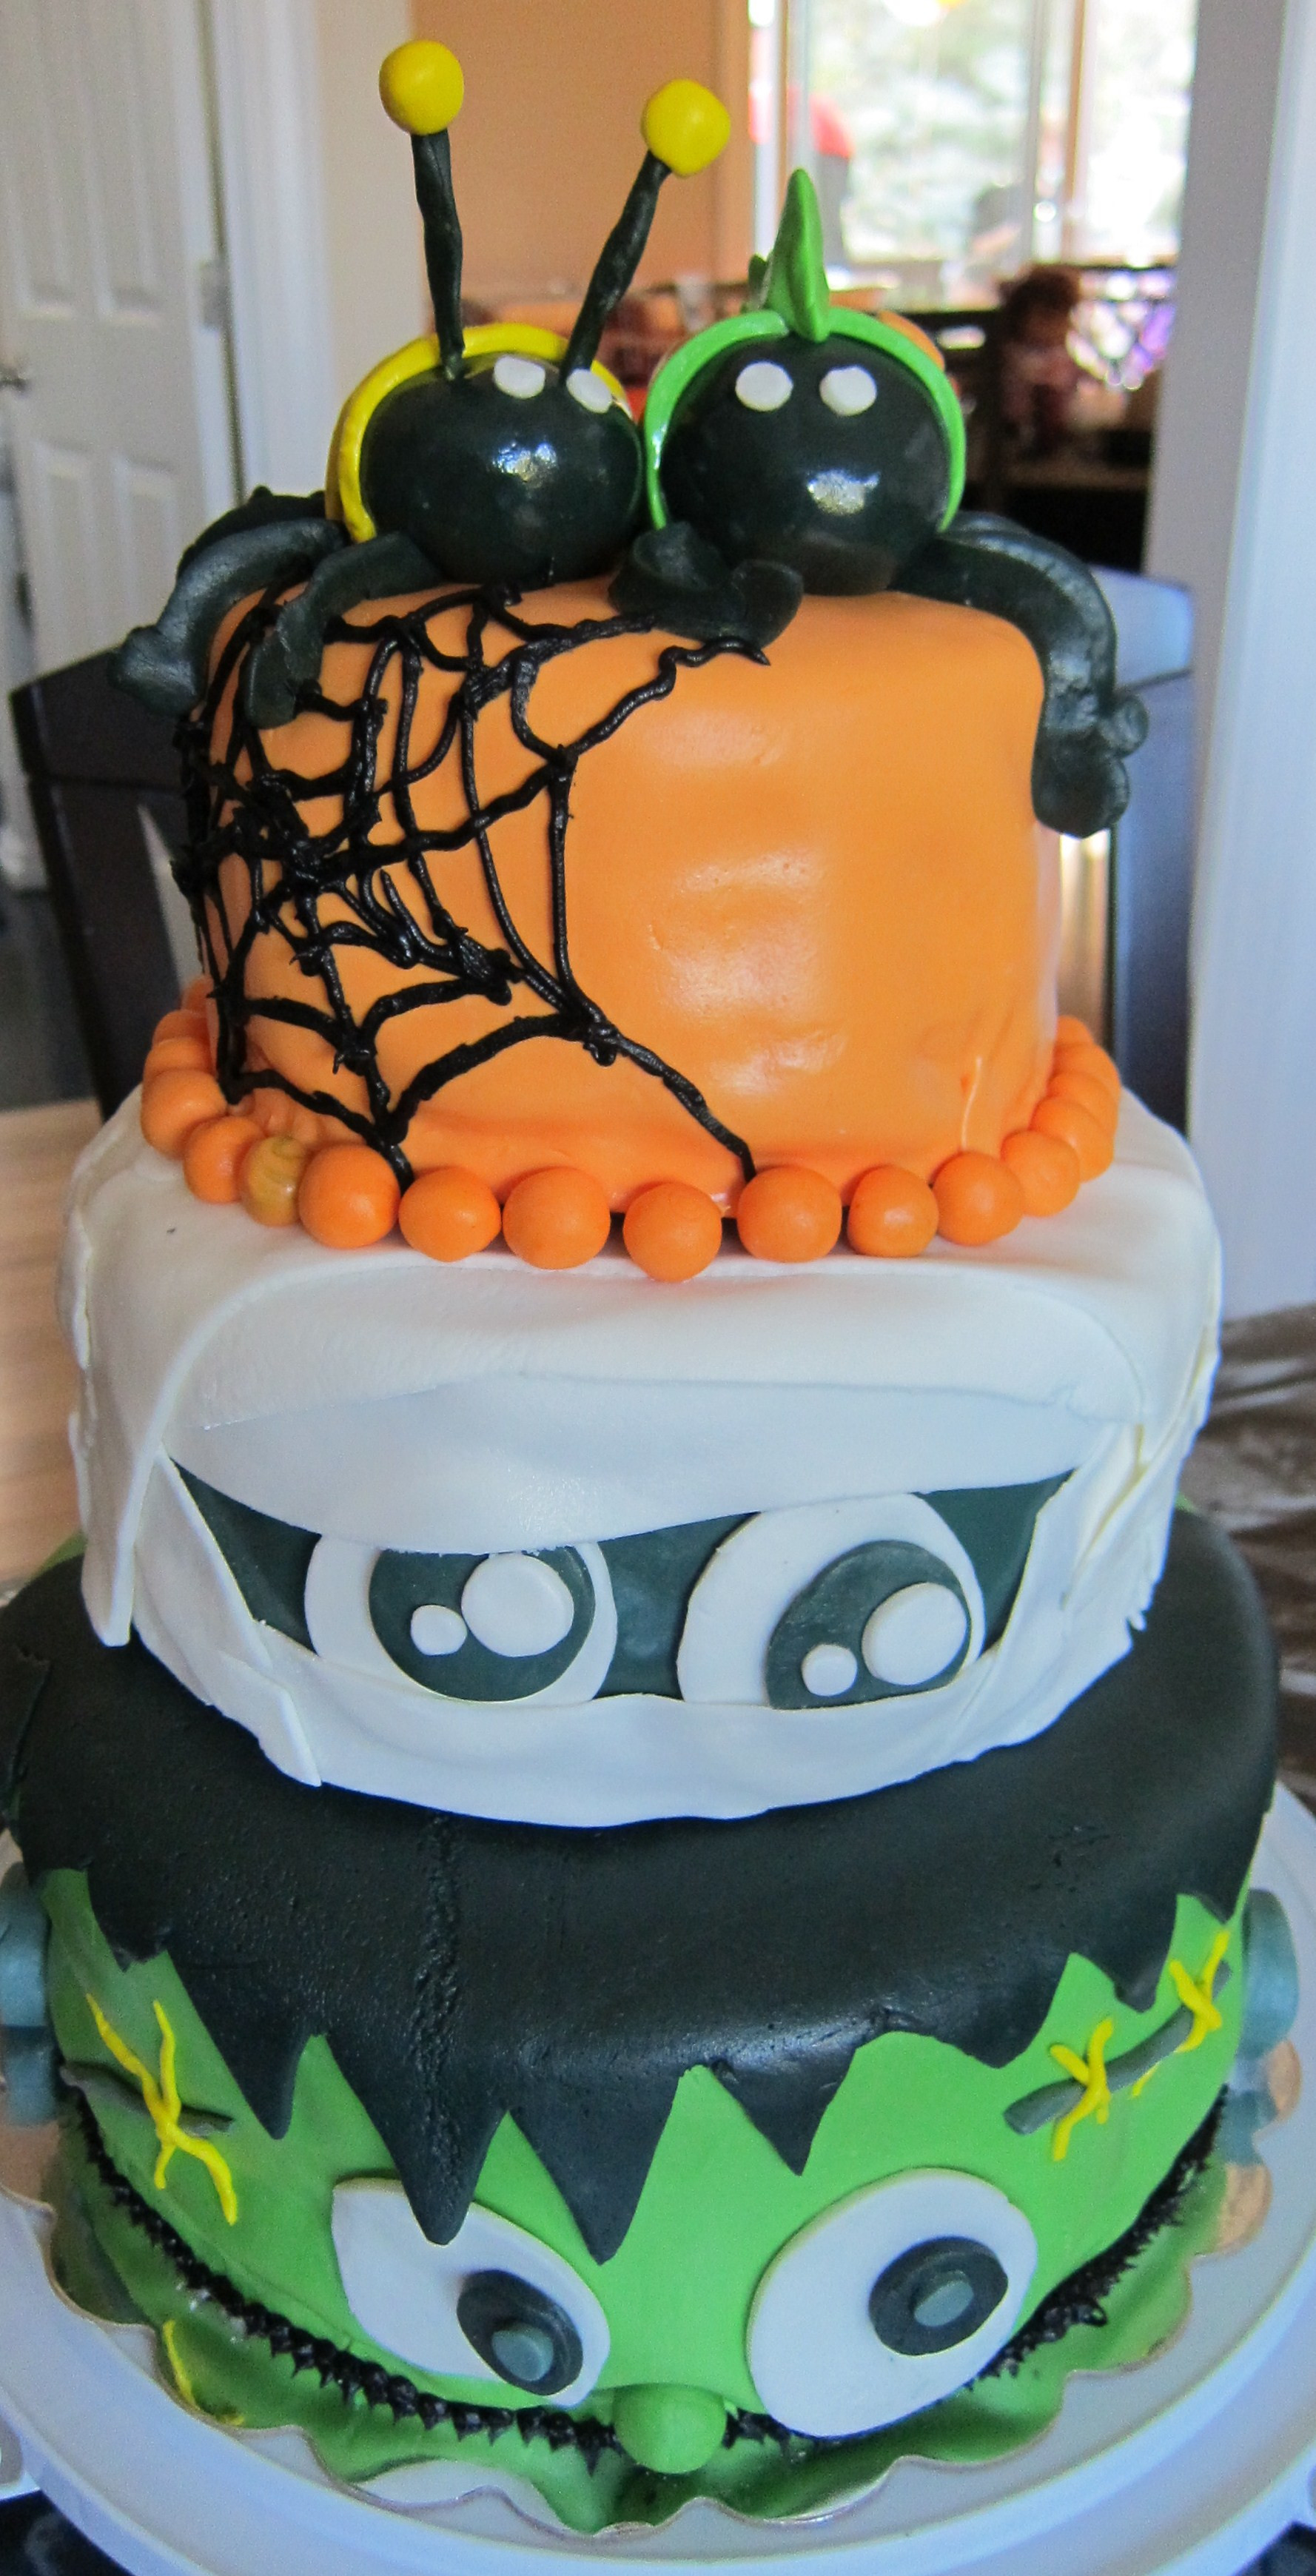 Homemade Halloween Cakes
 Homemade Halloween Cakes – Festival Collections